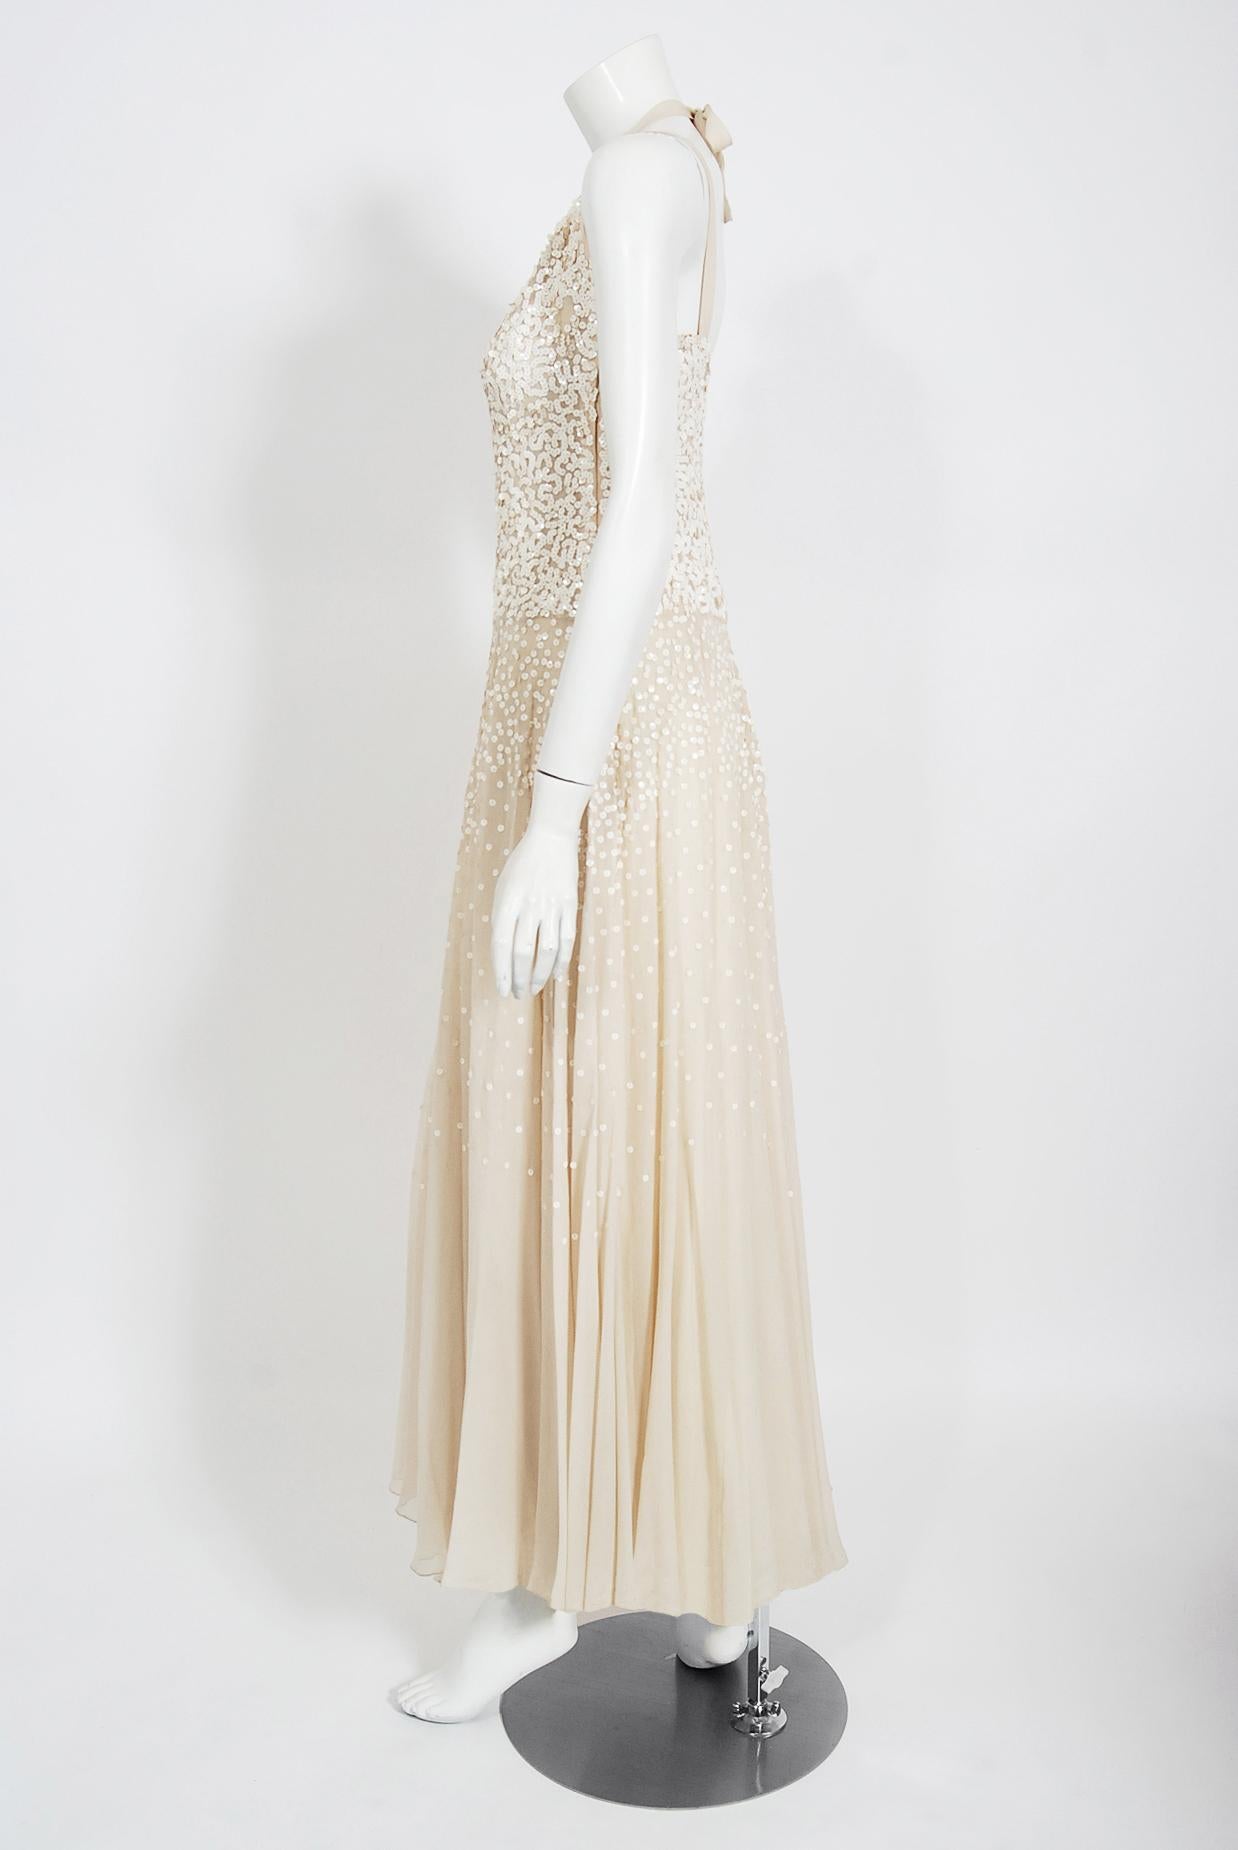 Women's Vintage 1940's Harry Cooper of Hollywood Ivory Sequin Chiffon Halter Bridal Gown For Sale